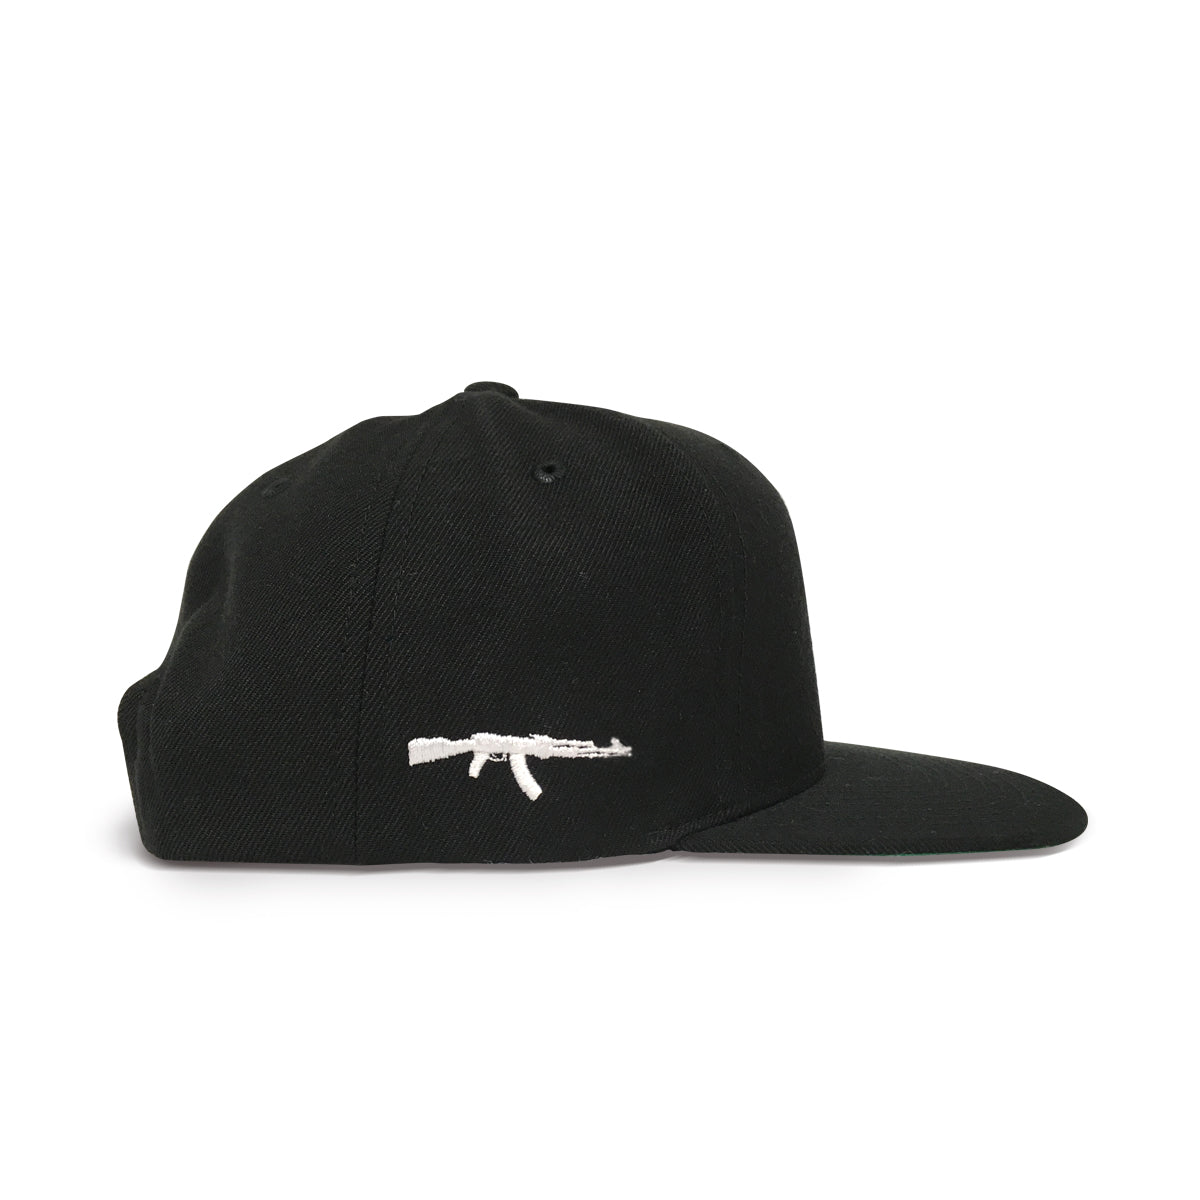 G Snapback Side Embroidery